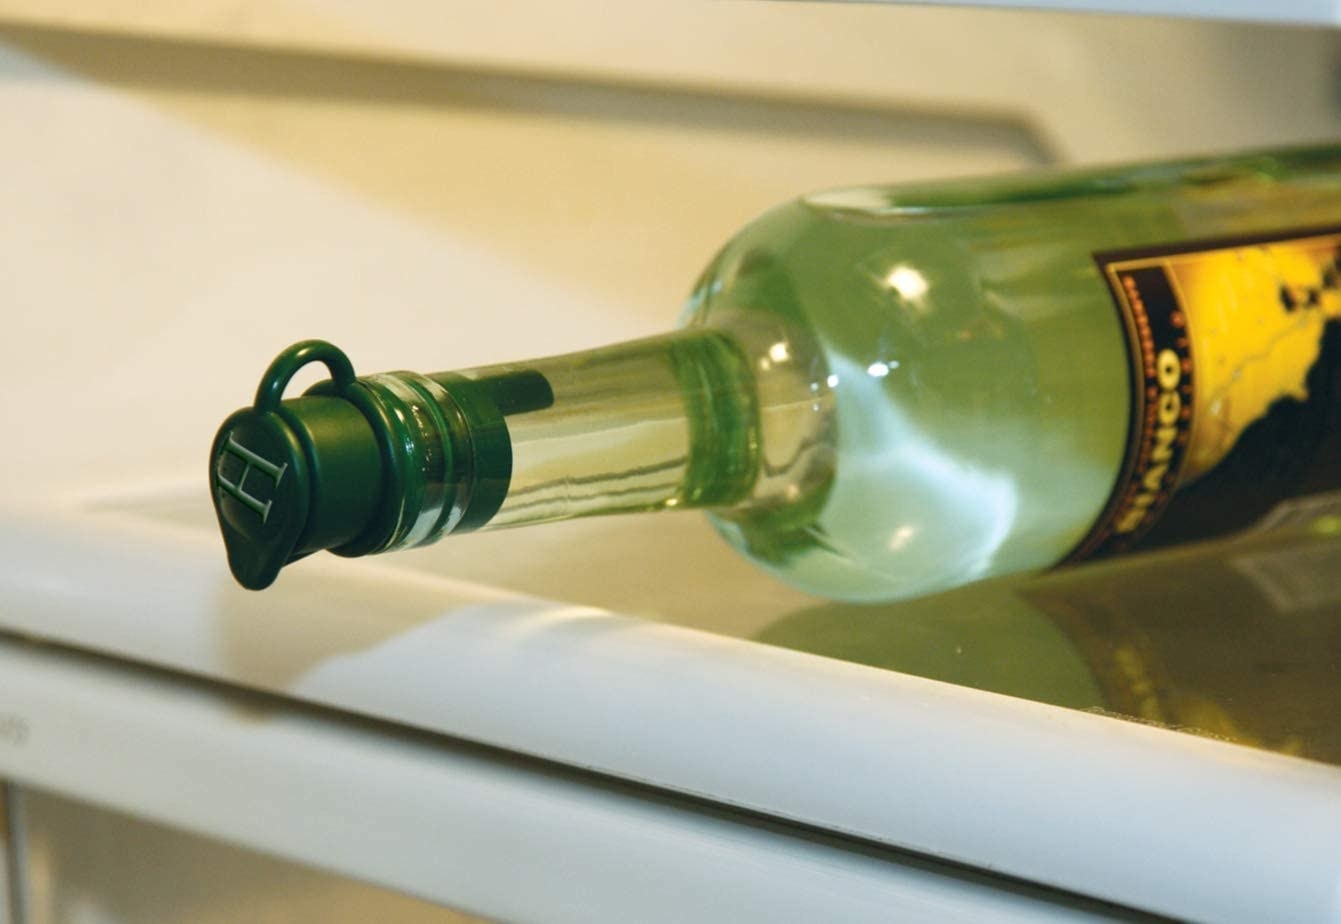 Wine bottle with stopper attached